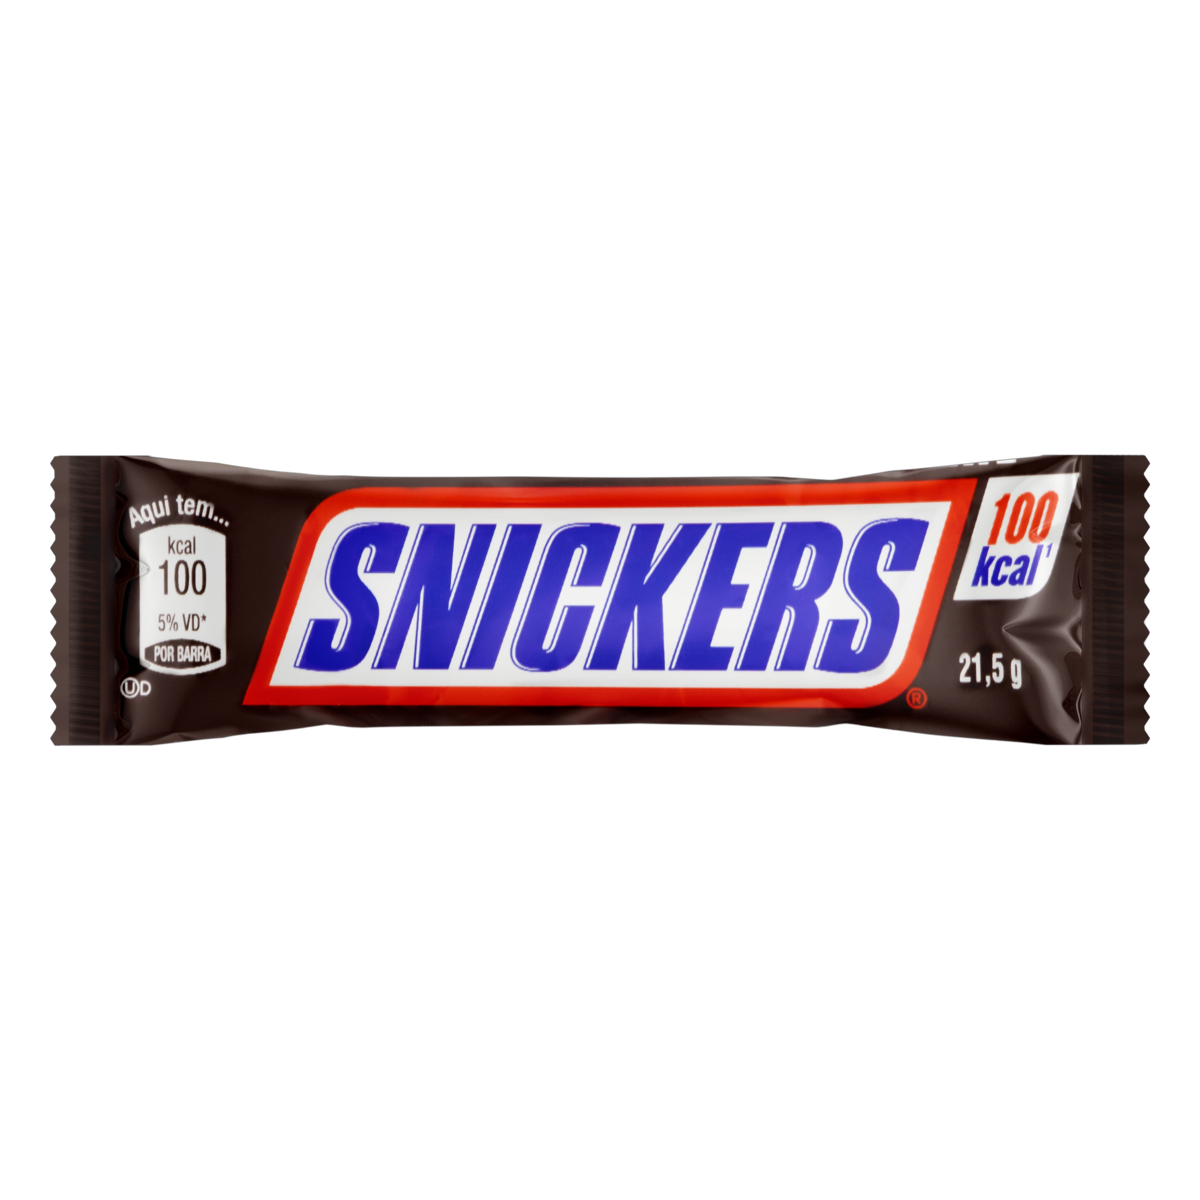 7896423483048 - CHOCOLATE SNICKERS PACOTE 21,5G